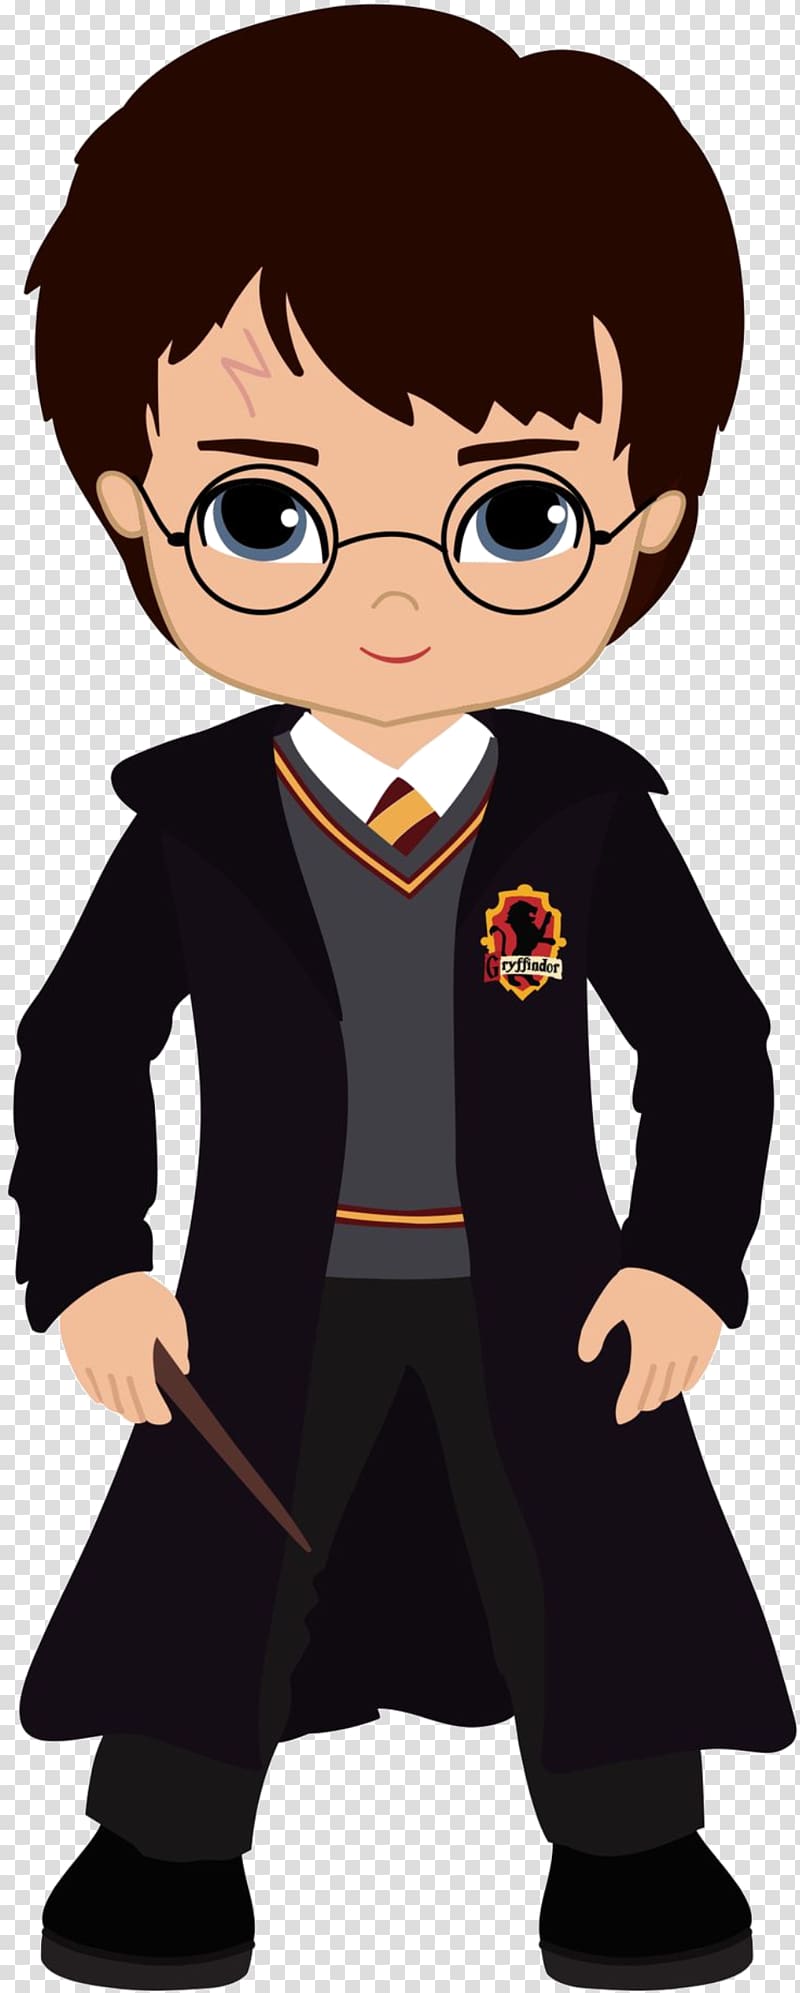 Harry Potter (Literary Series) Open Hogwarts School of Witchcraft and Wizardry, Harry Potter transparent background PNG clipart